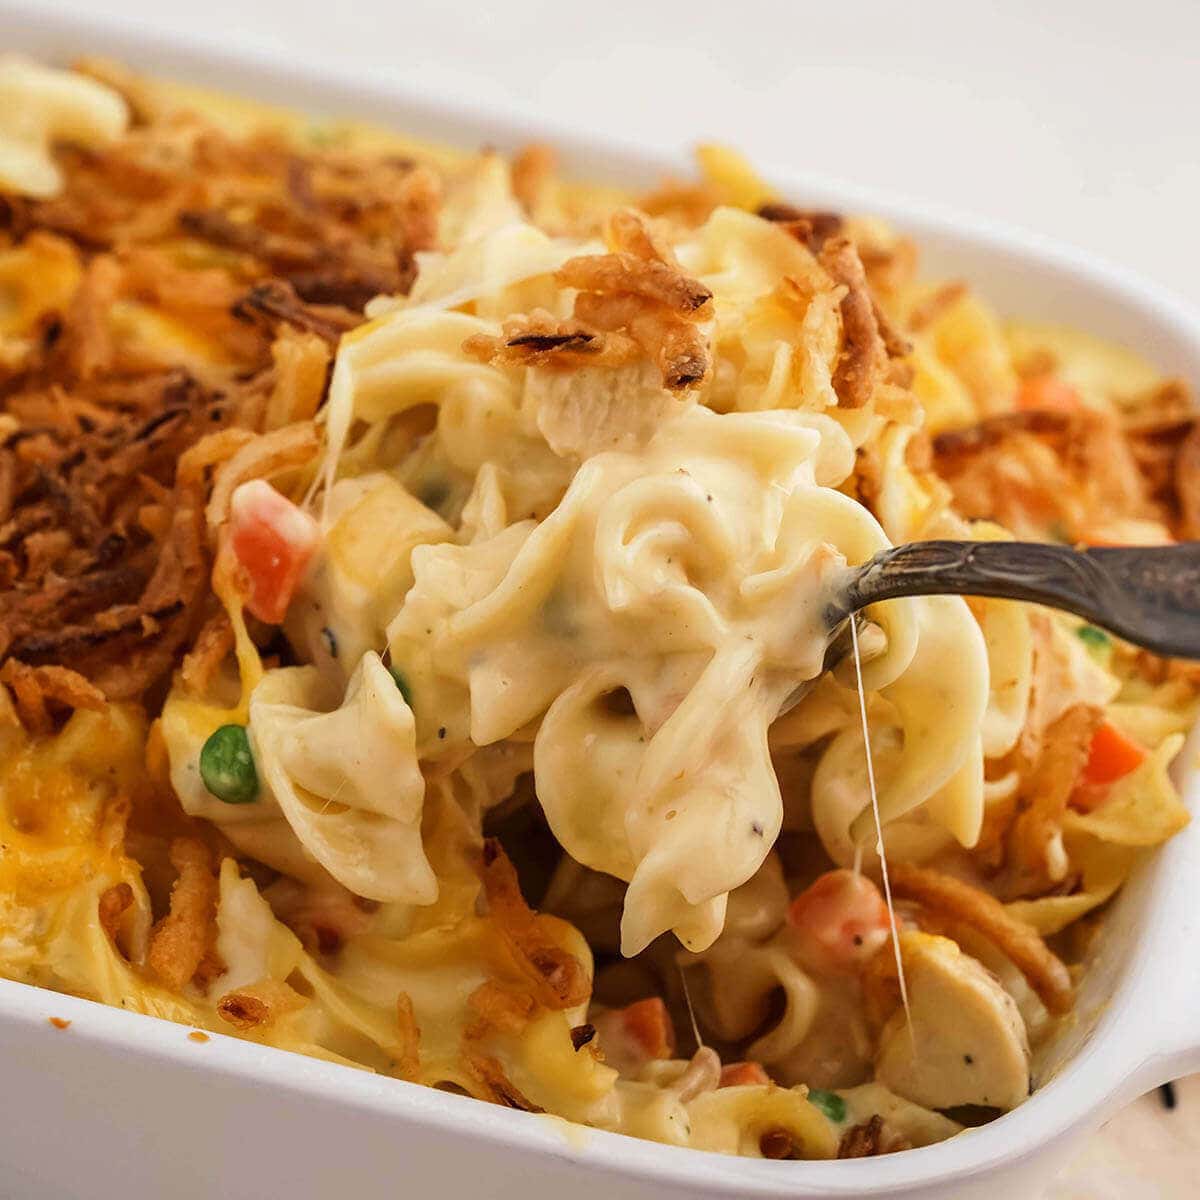 Cheesy chicken noodle casserole in baking dish with serving spoon.